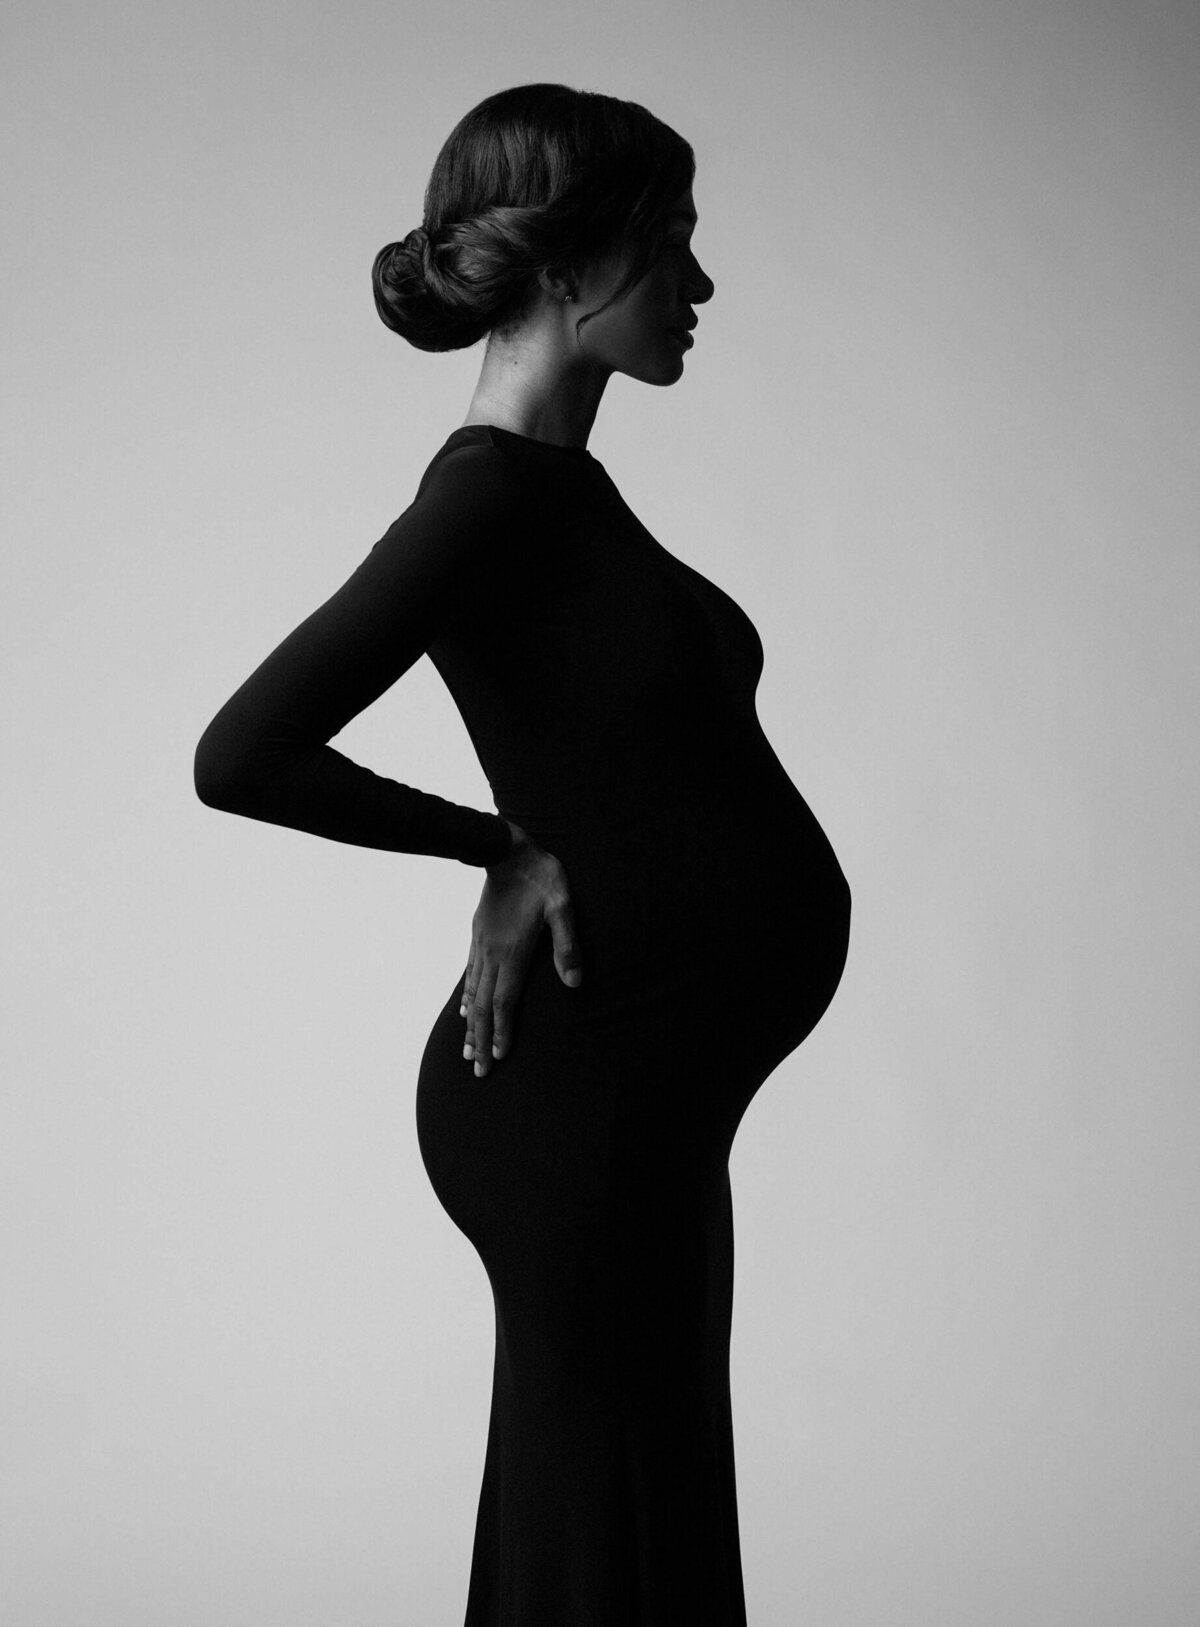 Artistic Lighting for Maternity Photography Course by Lola Melani-2